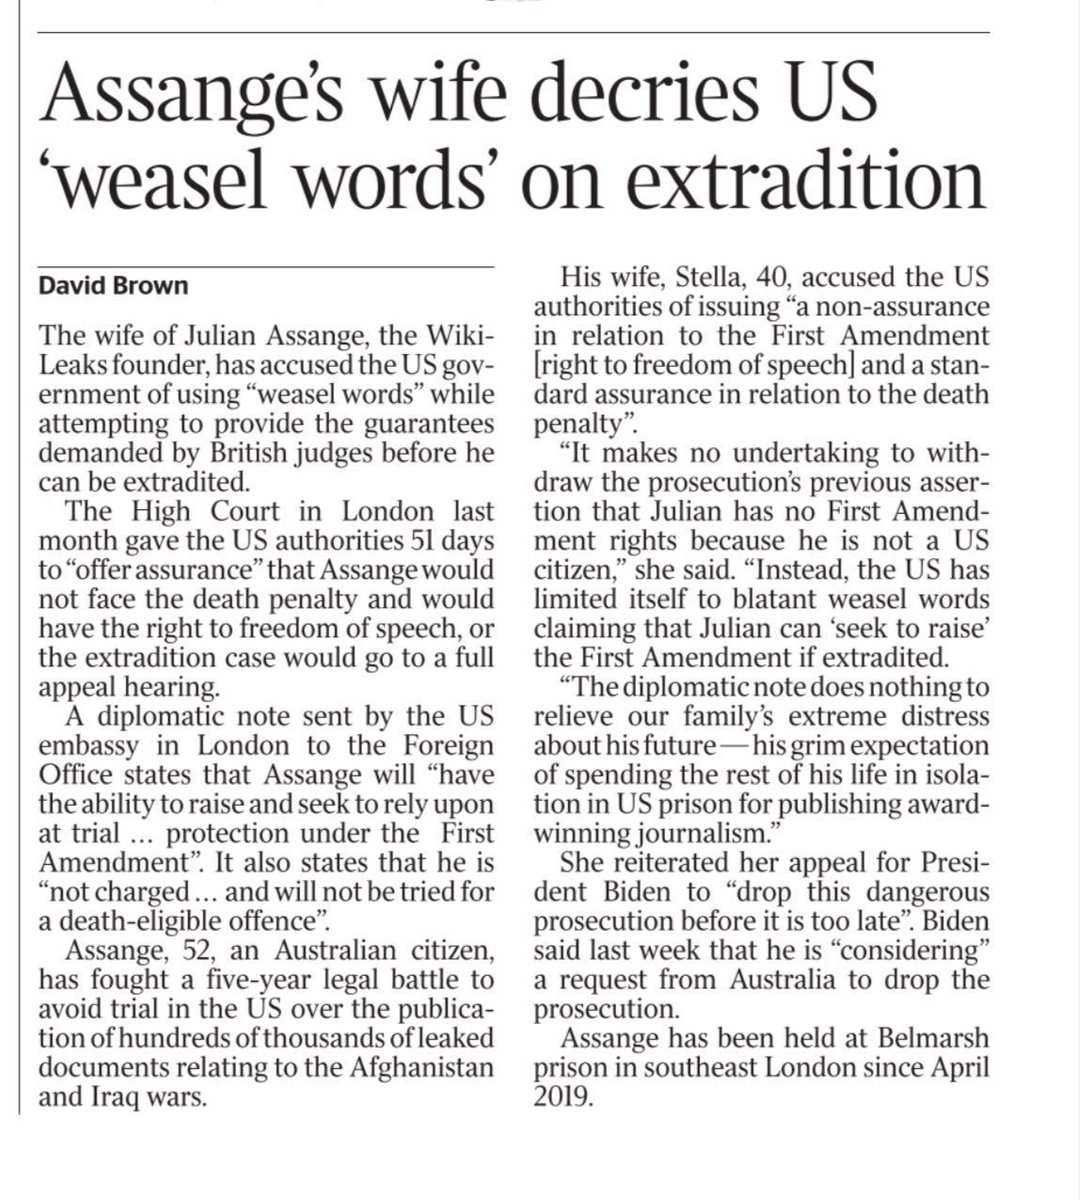 Stella Assange on US 'assurances': “The US has issued a non-assurance in relation to the First Amendment...weasel words claiming that Julian can 'seek to raise' the First Amendment if extradited' Extradition decision: Monday 20 May #FreeAssangeNOW